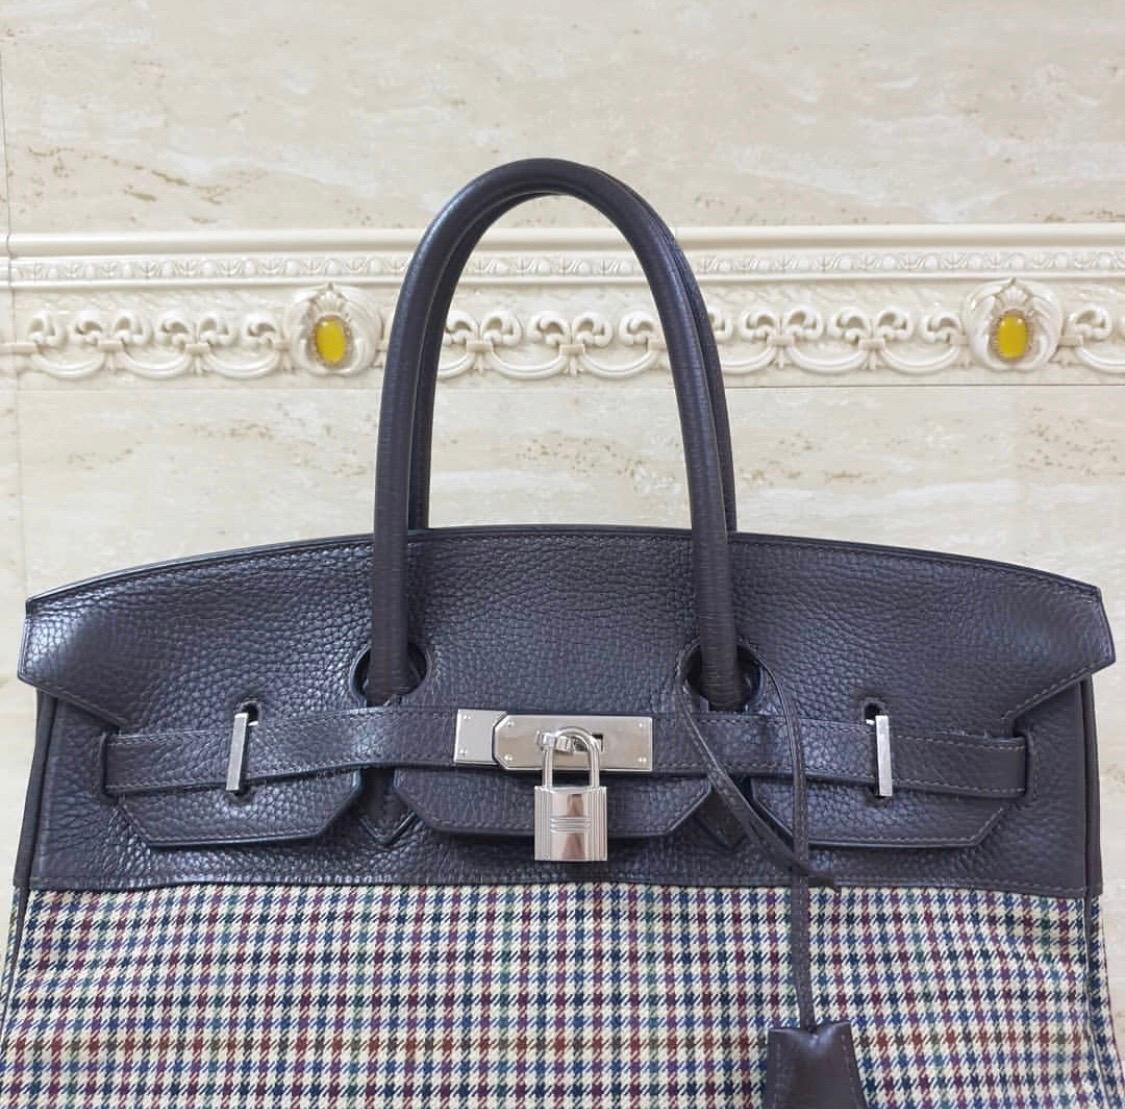  Authentic Hermès Birkin 35 Taurillon Clemence Leather and Houndstooth Canvas

Details: Chocolate Brown Taurillon Clemence Leather / Beige with Red and Green Stripe Fabric / Palladium Hardware / Dual Rolled Handles / Protective Studs at Base / Brown